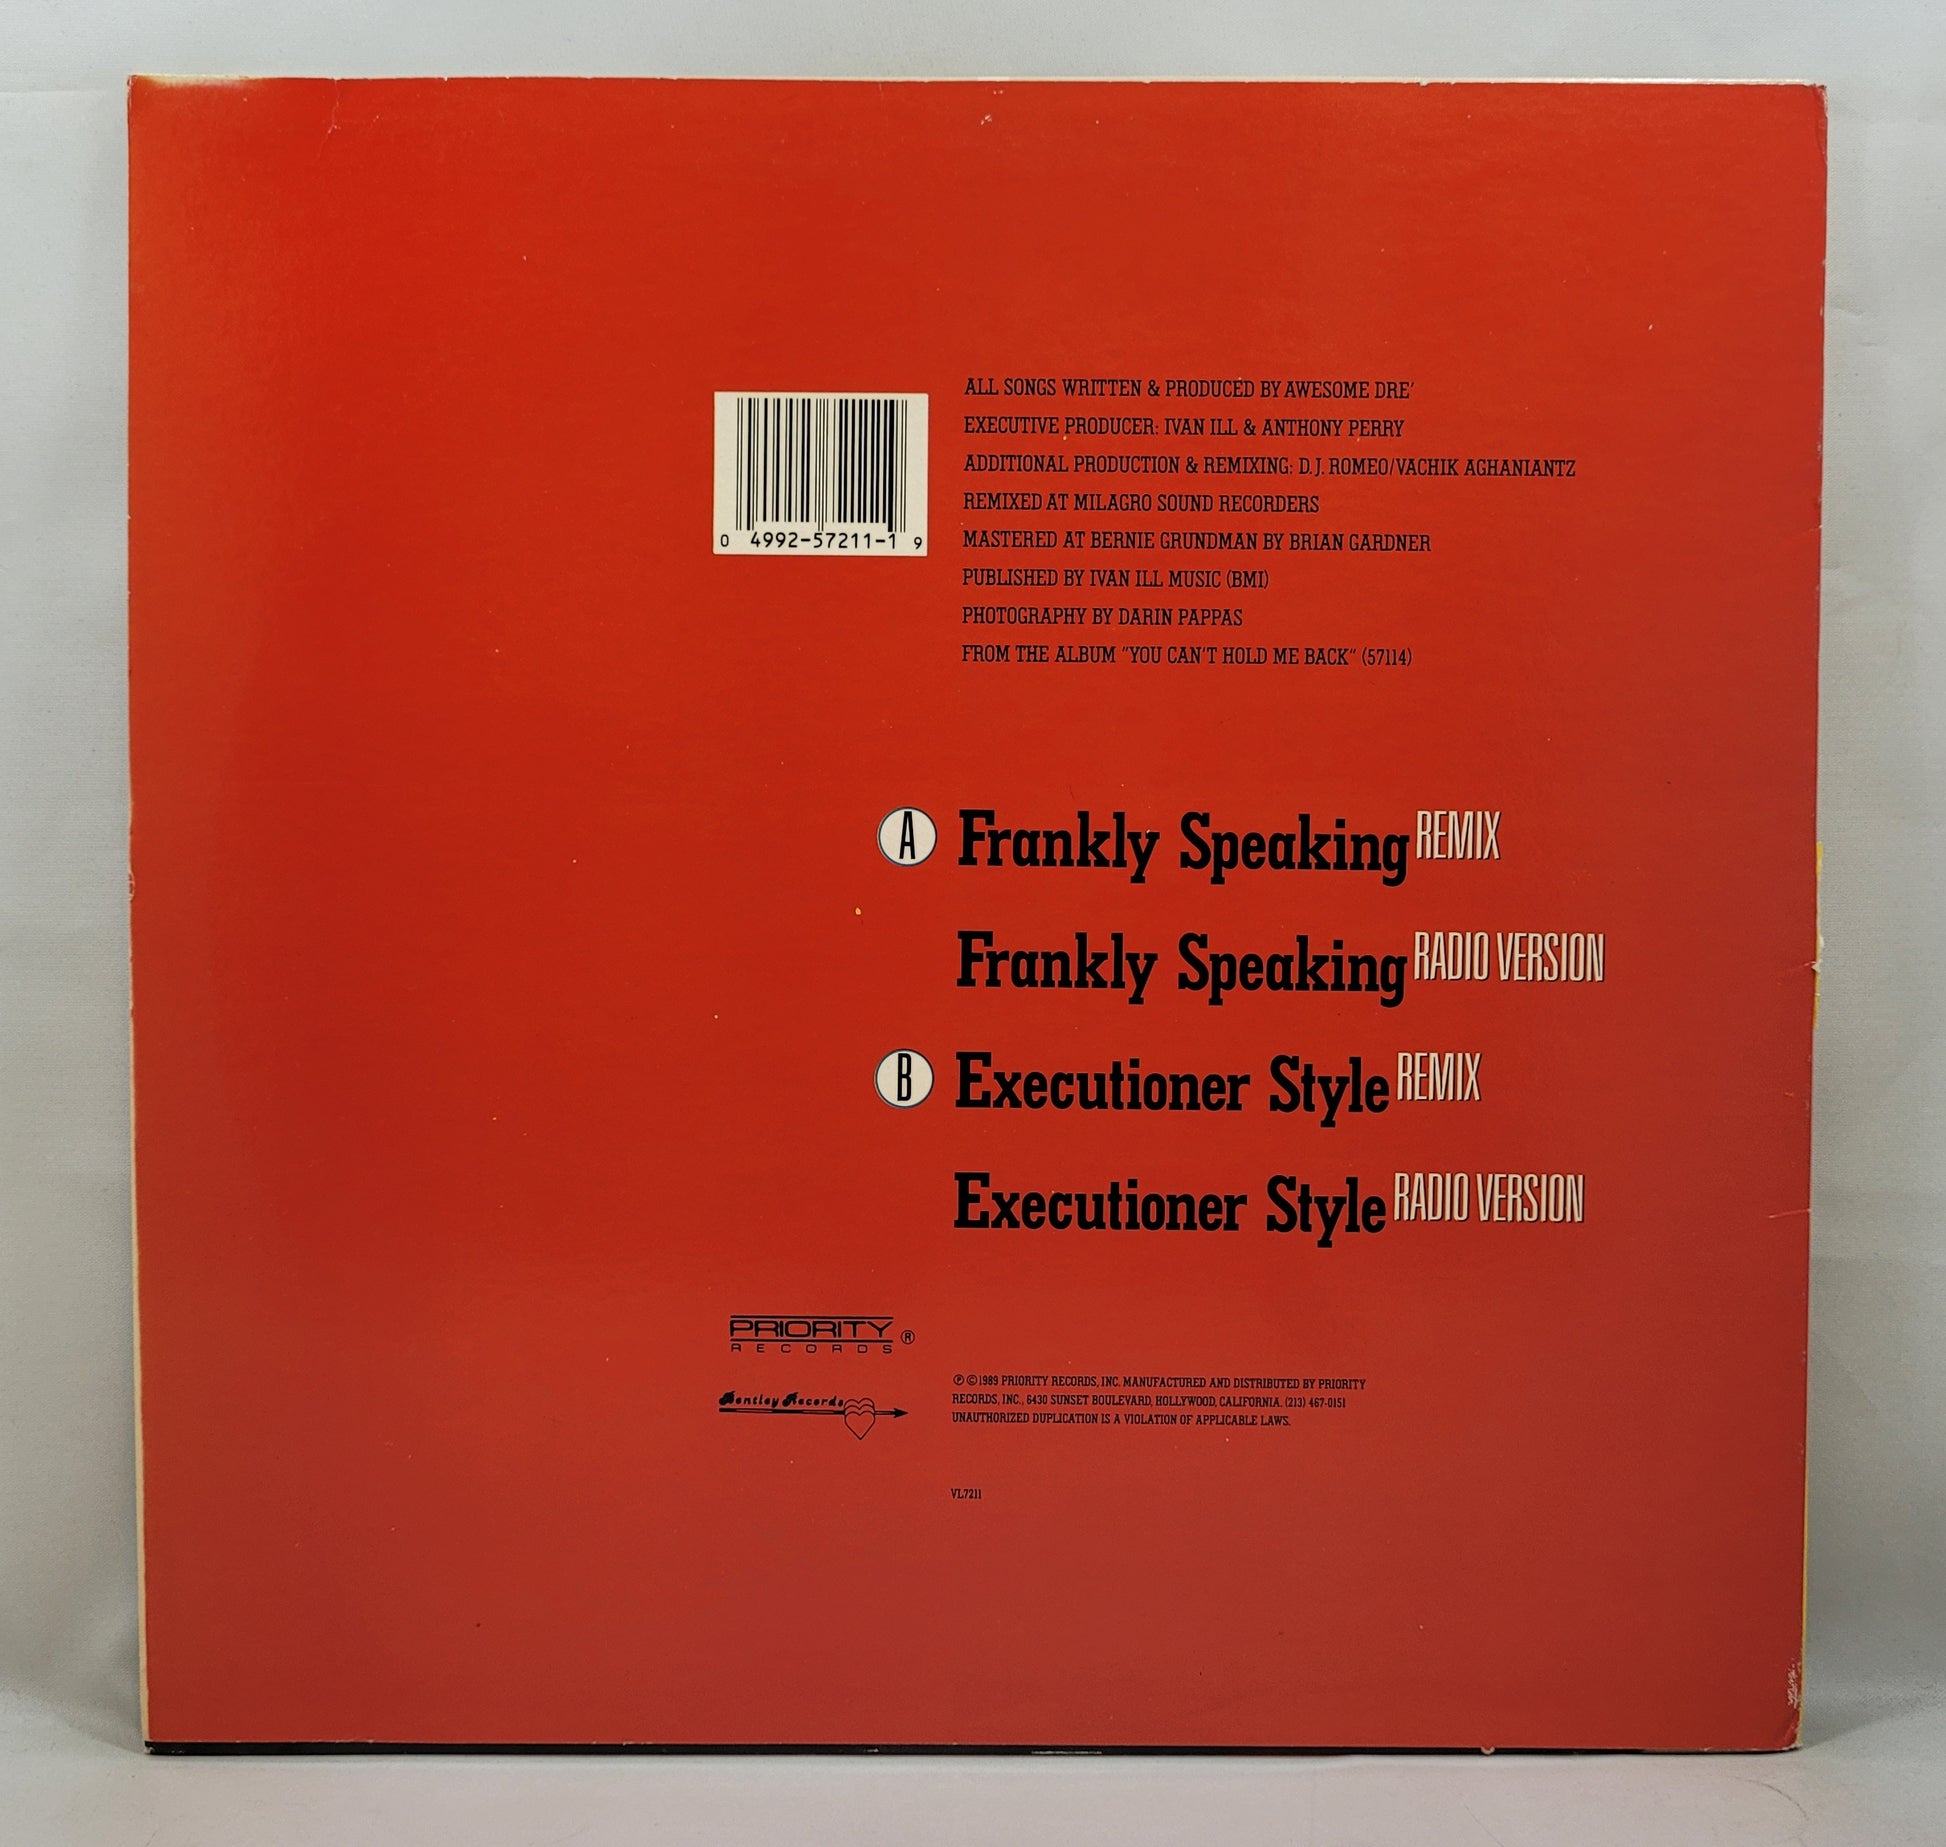 Awesome Dré and The Hardcore Committee - Frankly Speaking / Executioner Style [1989 Used Vinyl Record 12" Single]